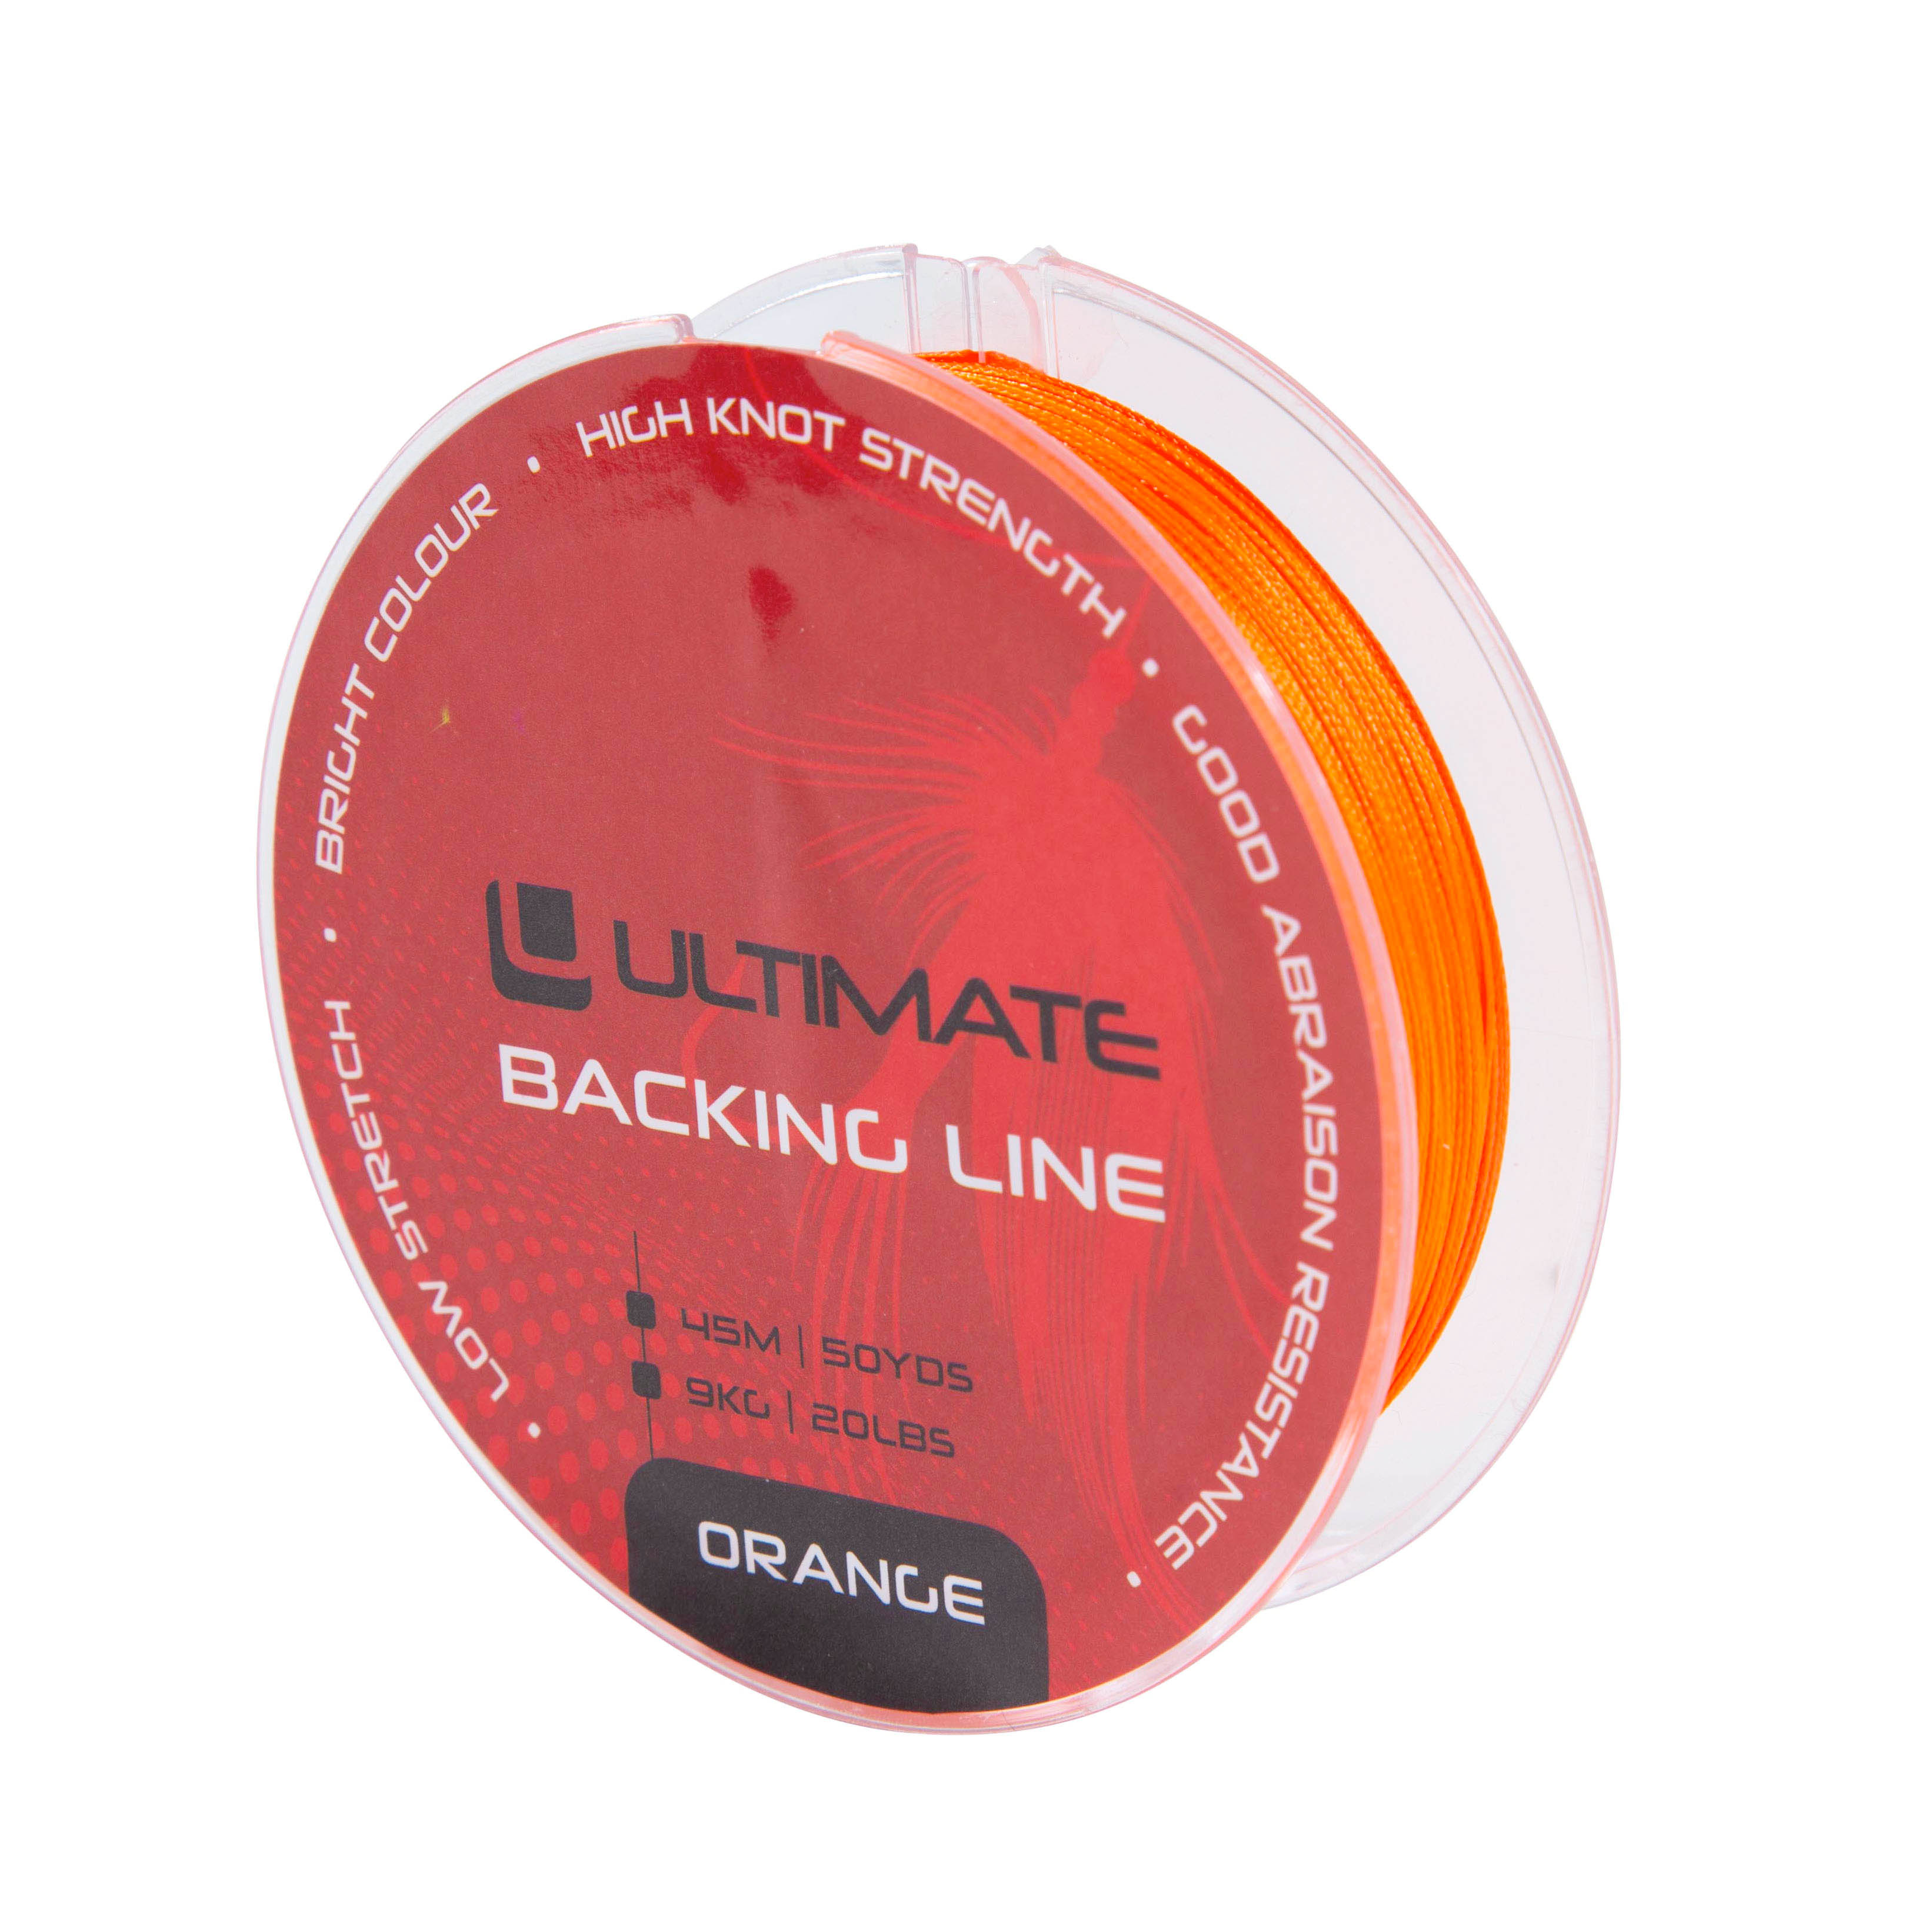 Ultimate Drifter Fly Combo Fly Fishing Set